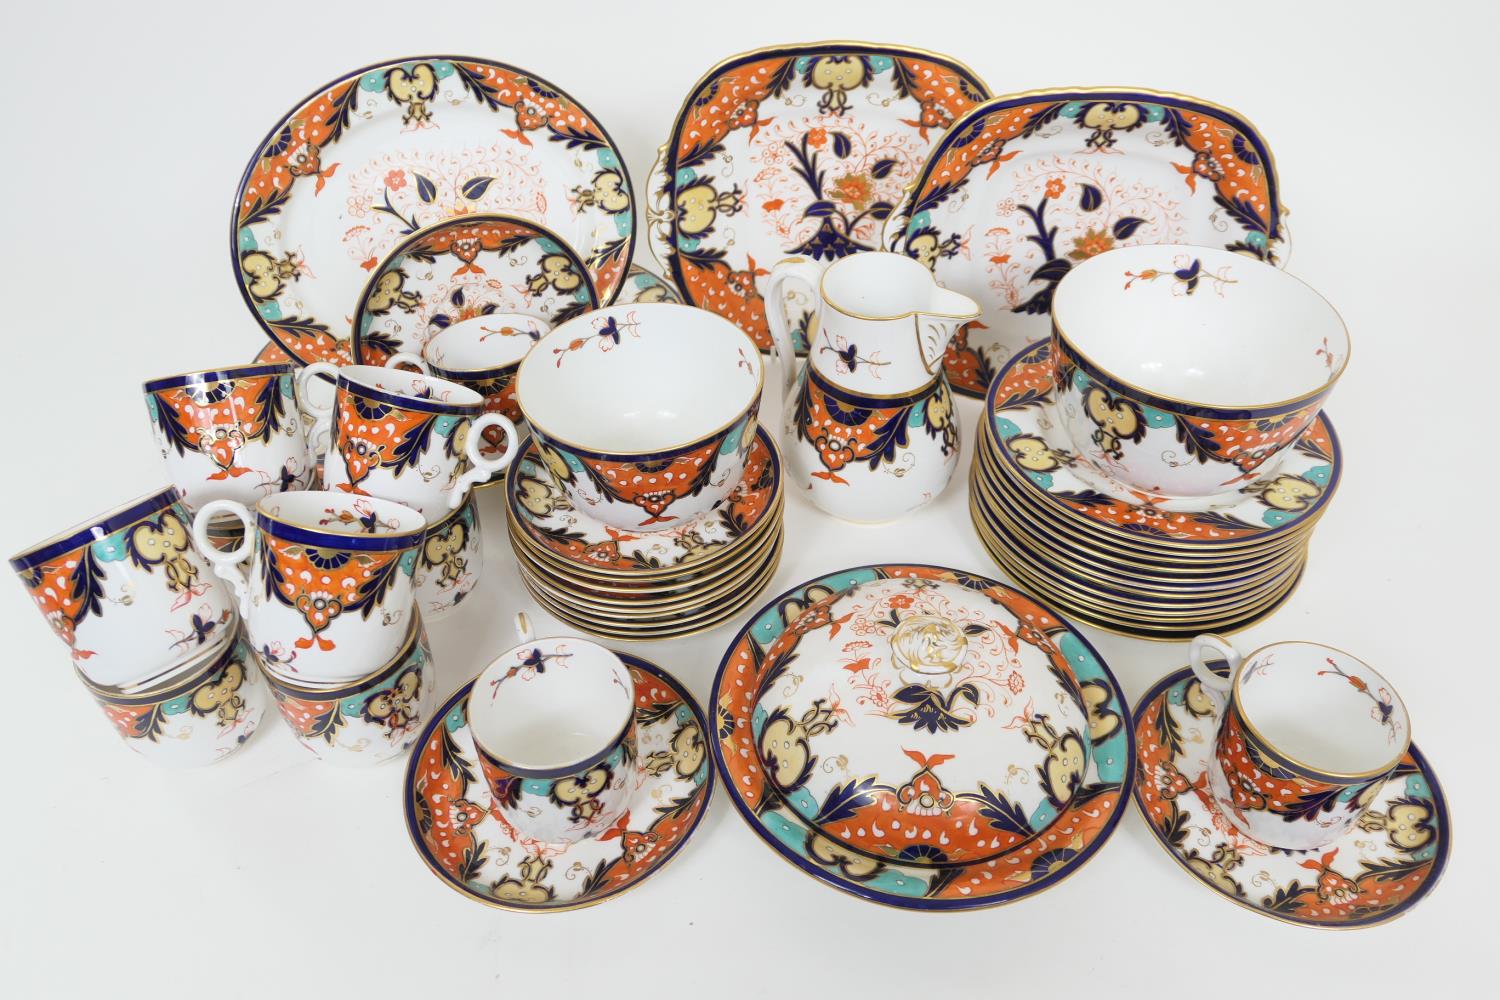 Davenport imari patterned tea and dessert service, late 19th Century, decorated in Japonesque